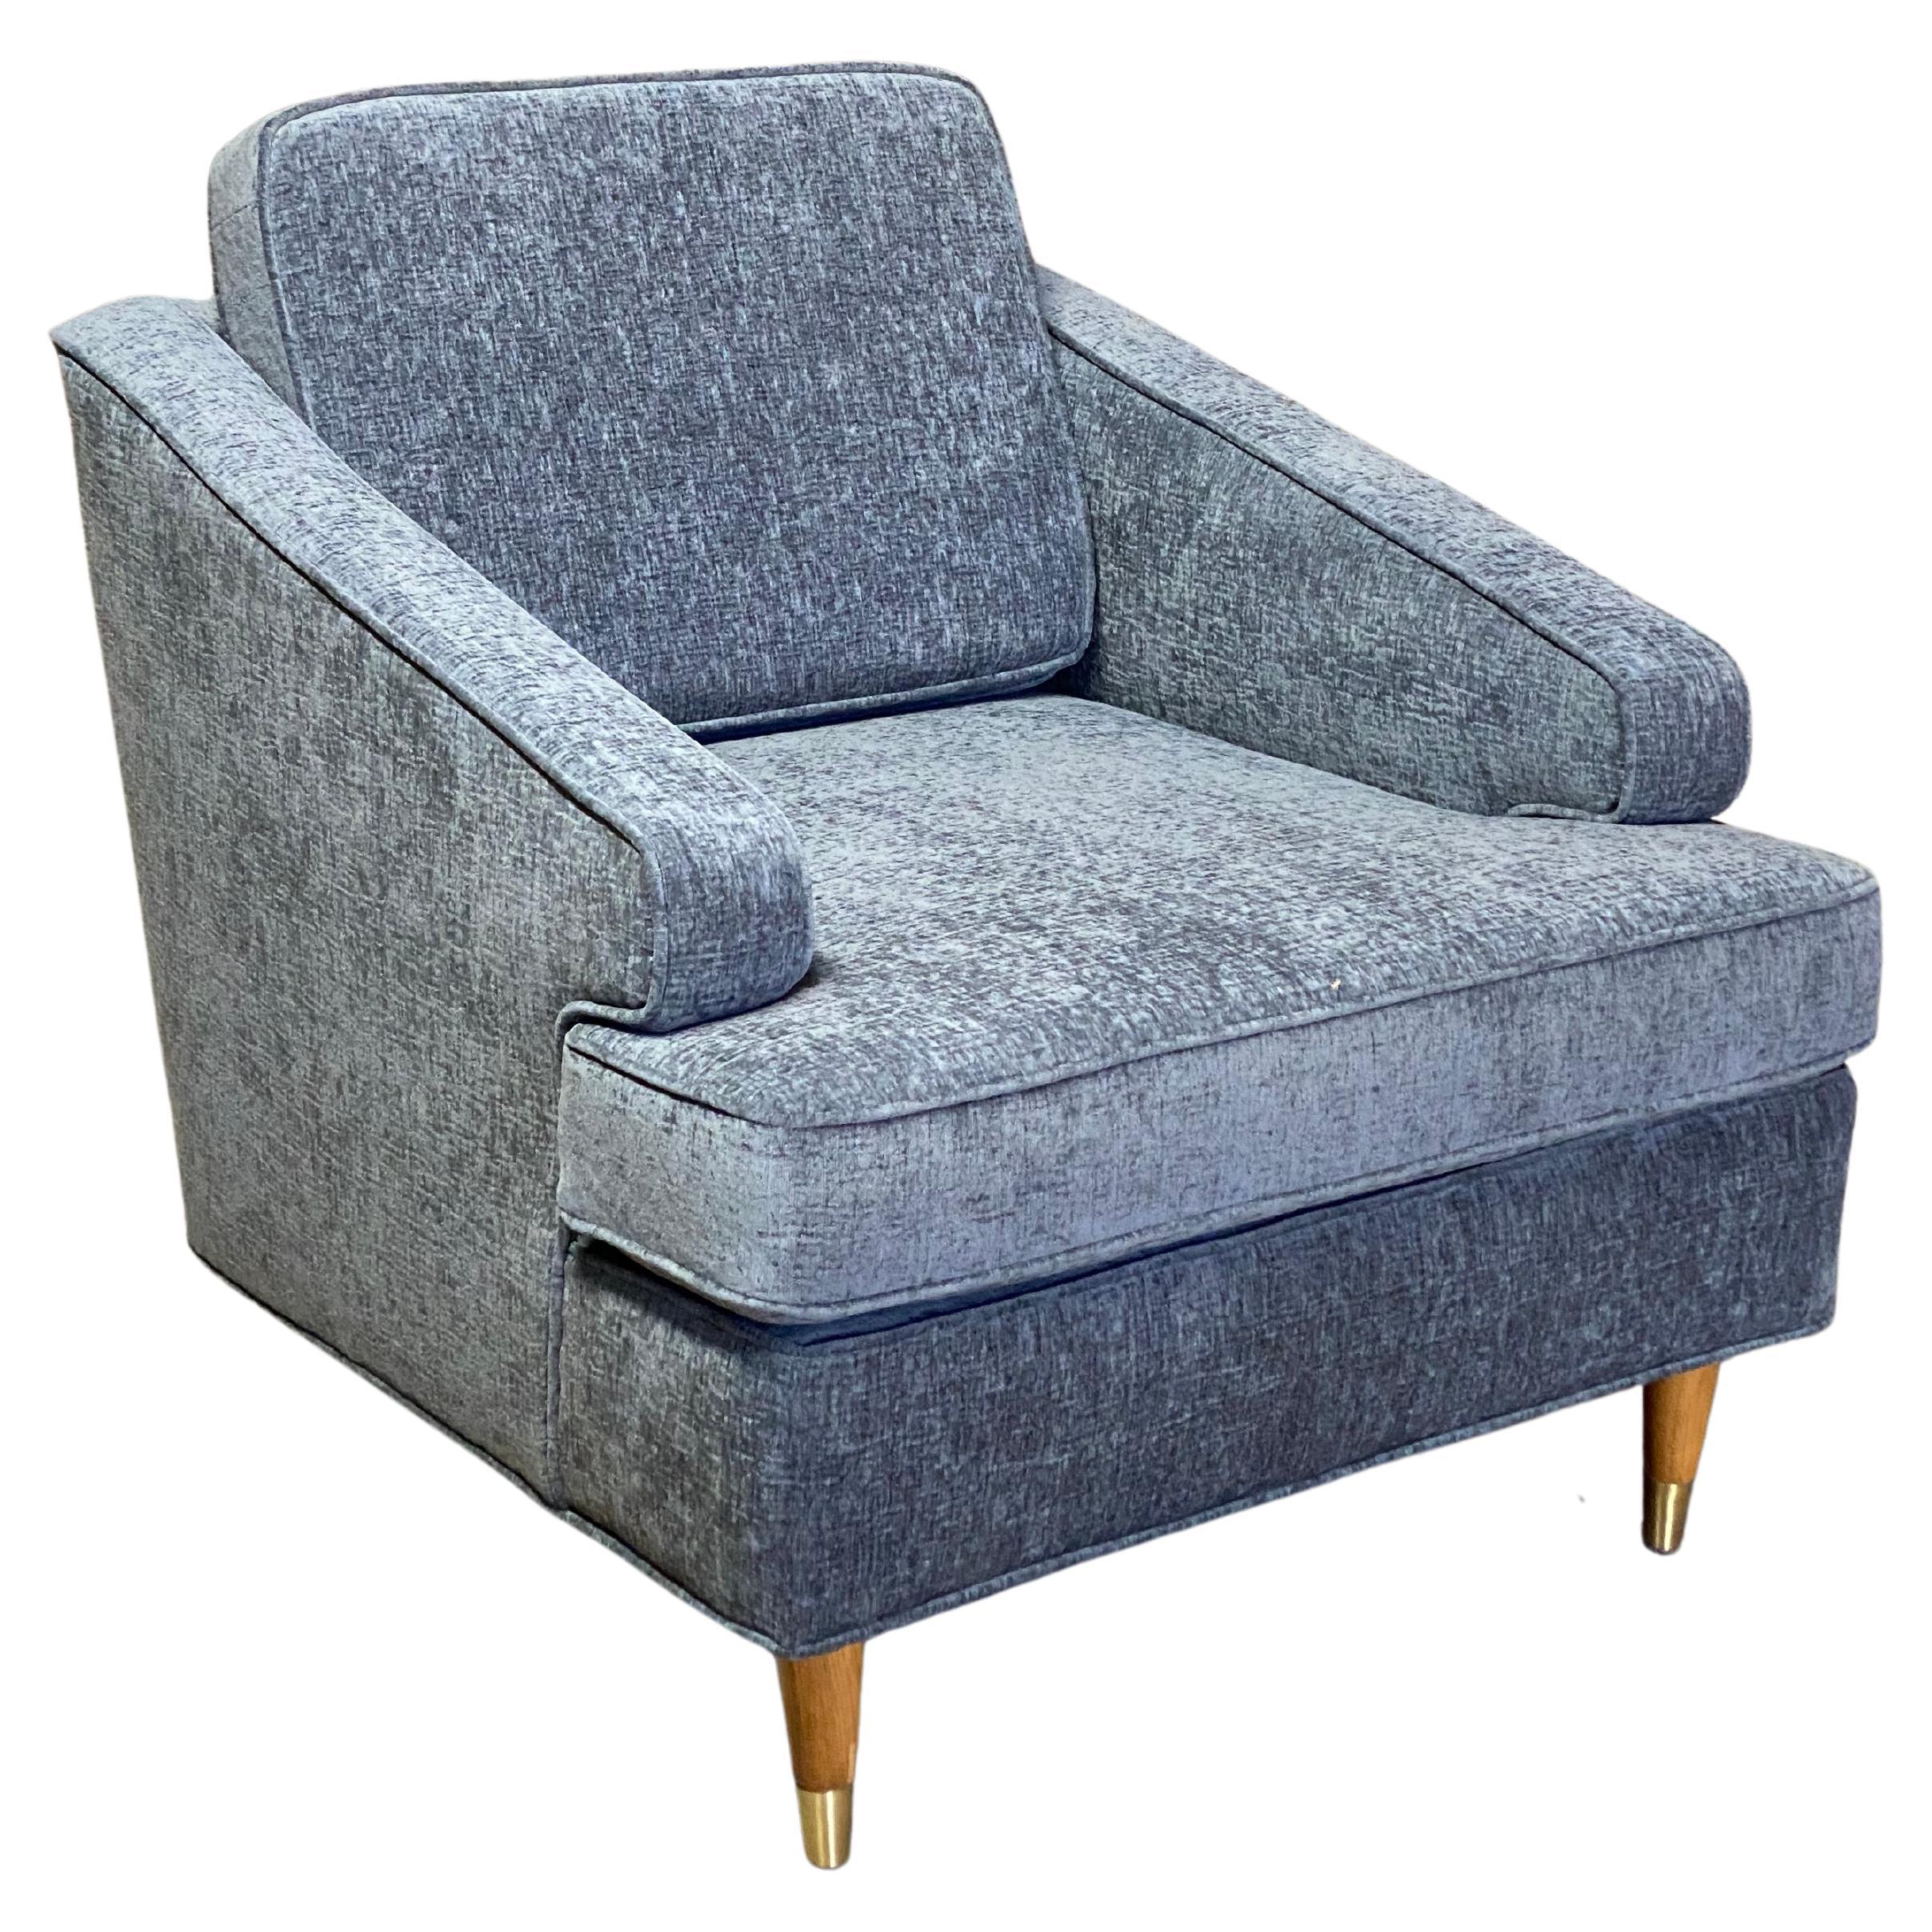 A very sexy chair! Compact and angular, but due to the lines and subtle curves it gives the appearance of a much larger chair. A chair with, most importantly, presence and comfort. Newly upholstered in light gray Nanolux crushed velvet fabric and